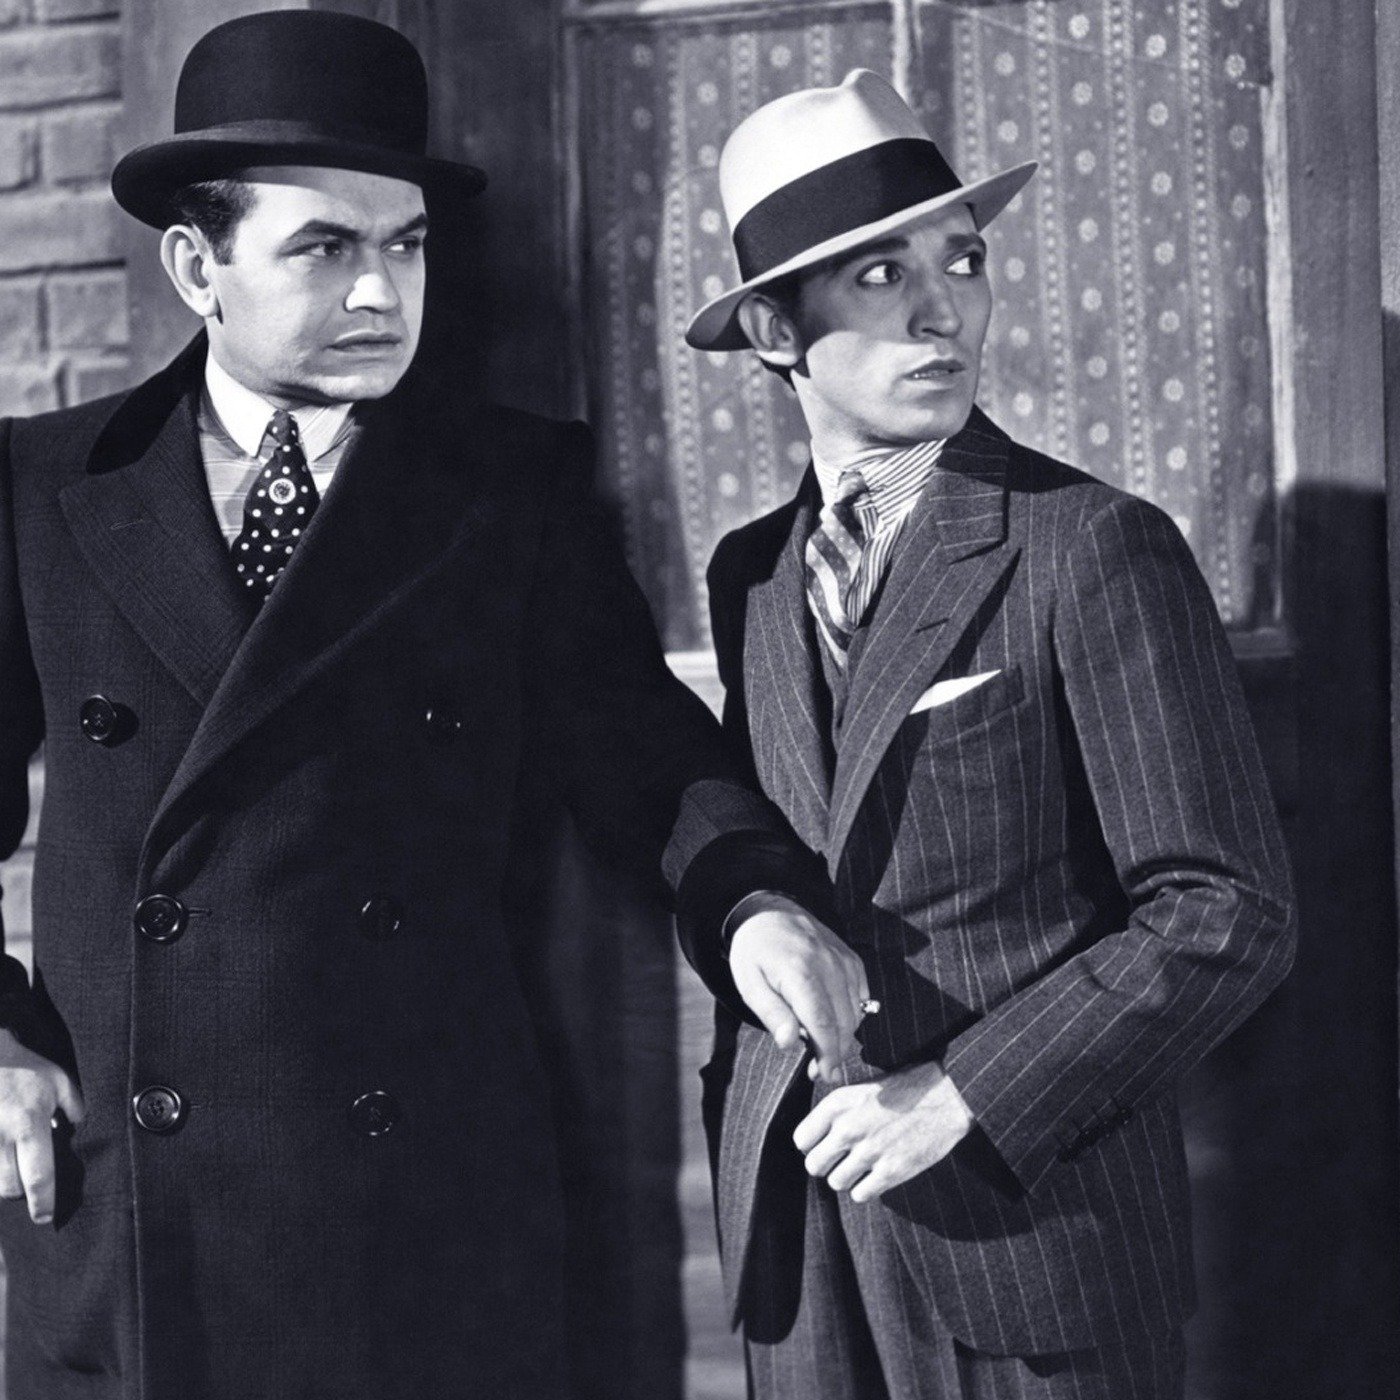 1930s gangster movies